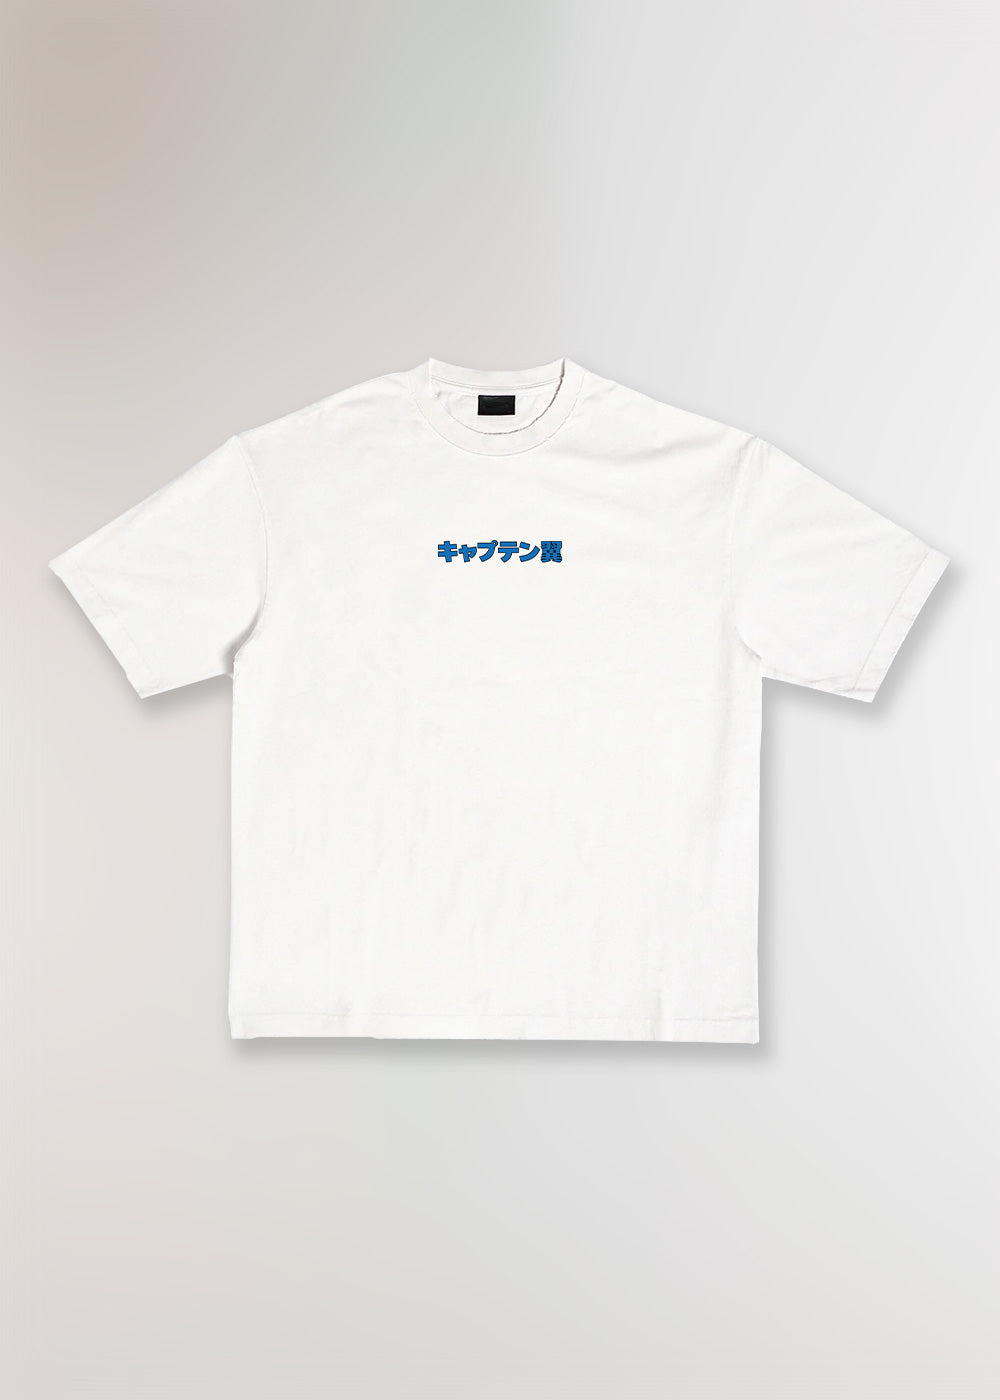 MADE IN JAPAN - CHAMPIONS® WHITE TEE